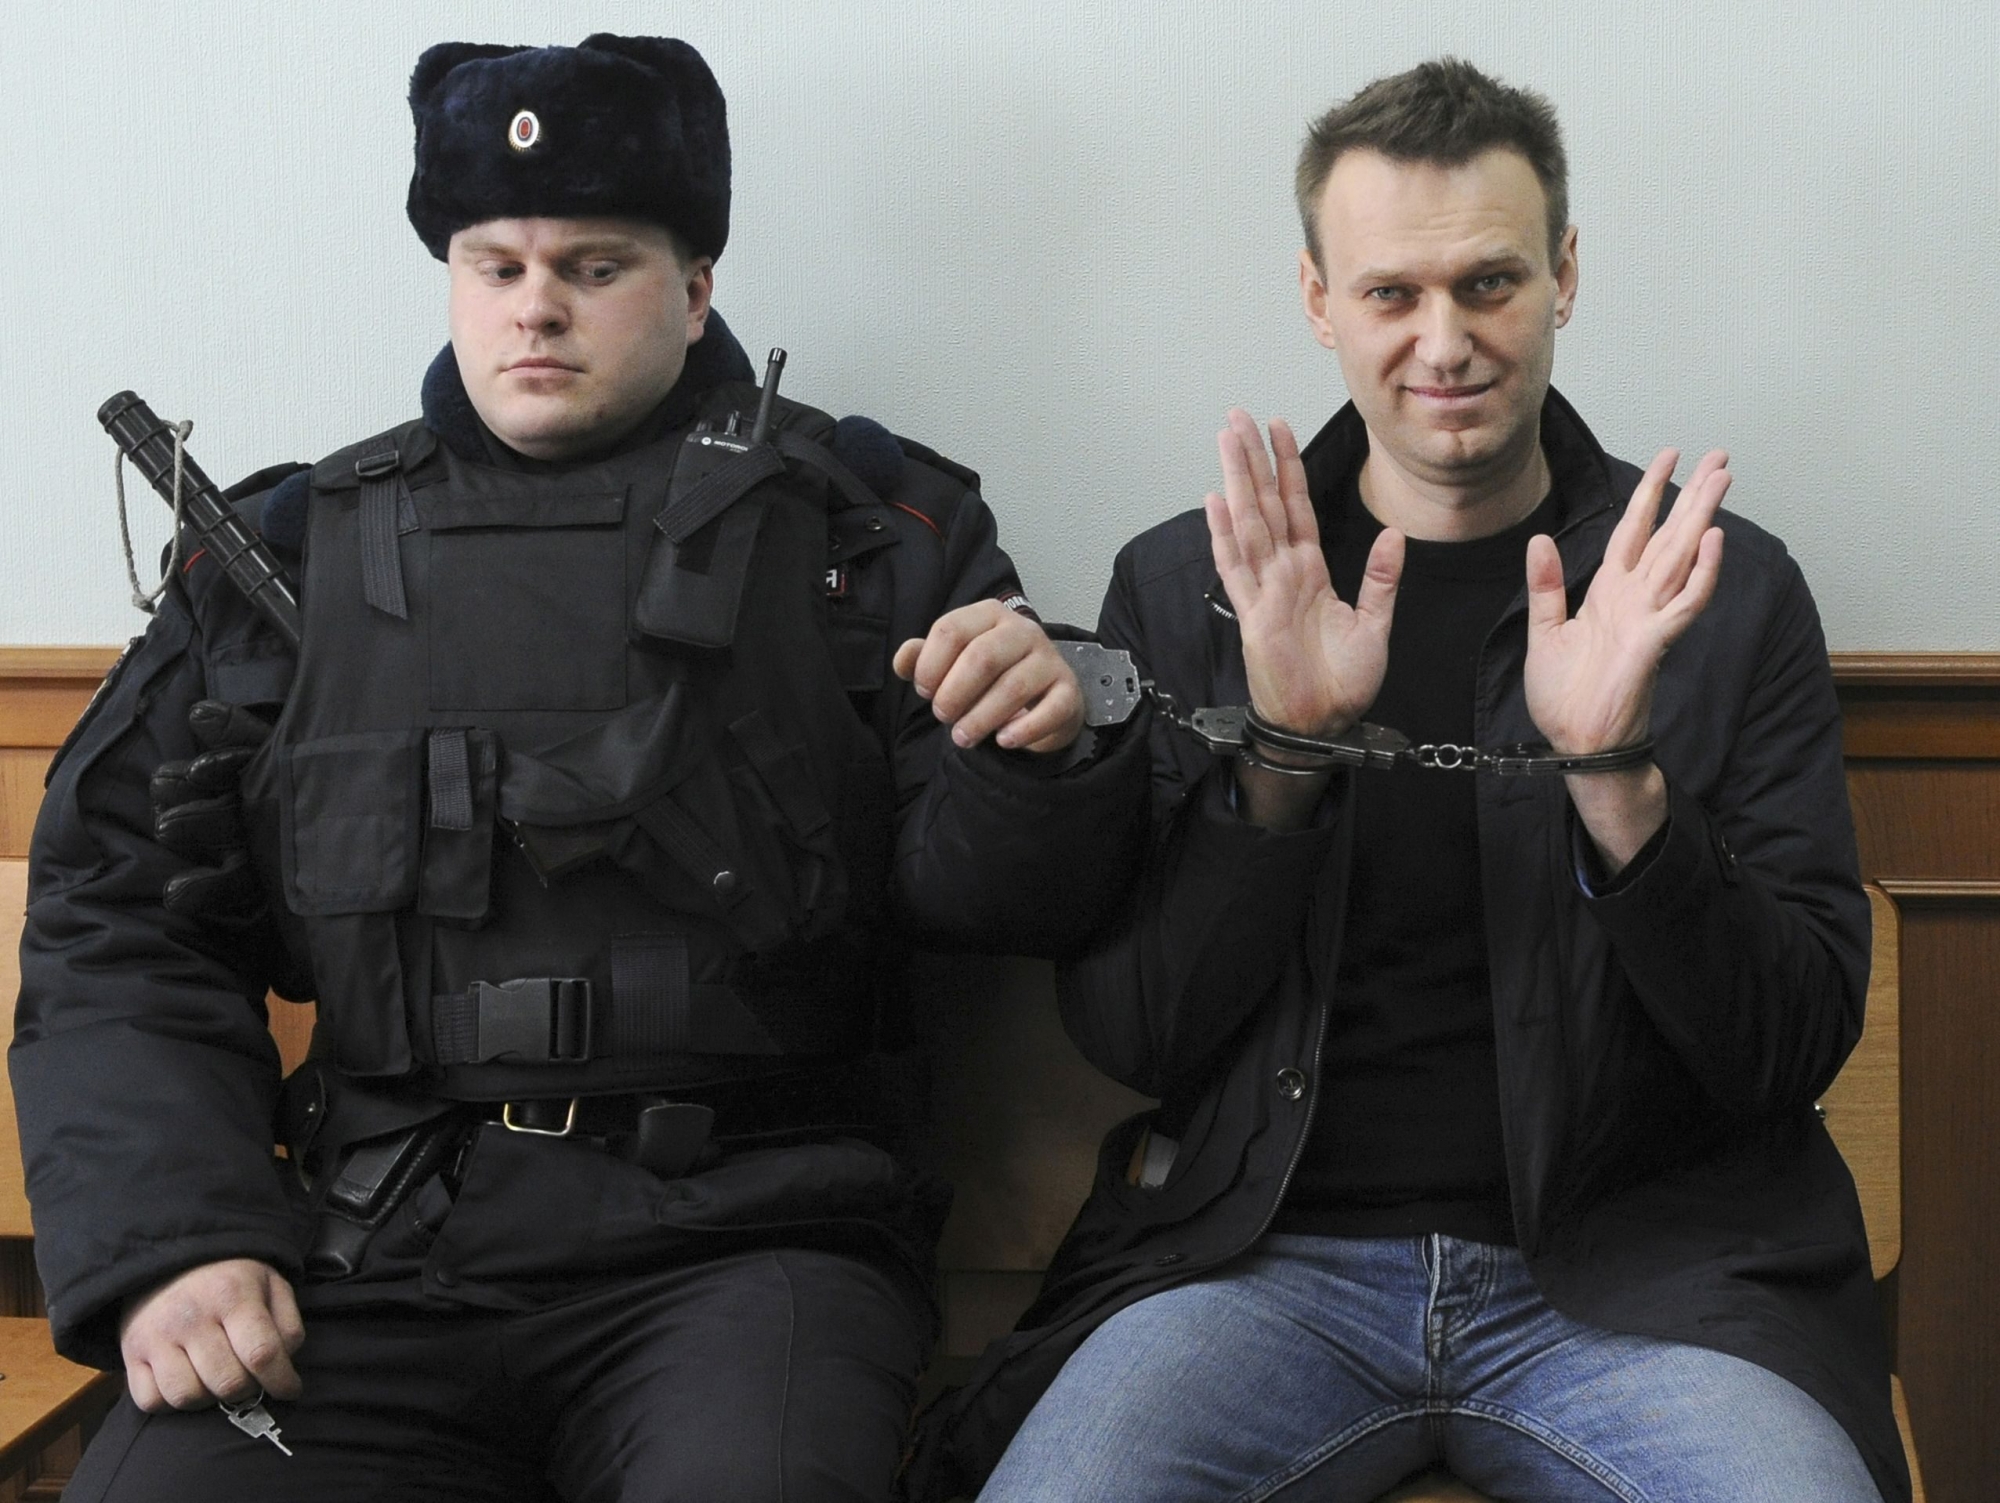 Russian opposition leader Alexei Navalny, right, poses for press in court in Moscow, Russia, Thursday, March 30, 2017. Navalny attends a court hearing on his appeal. Navalny, who organized a wave of nationwide protests against government corruption was sentenced to 15 days in jail.(AP Photo) RUSSLAND OPPOSITION